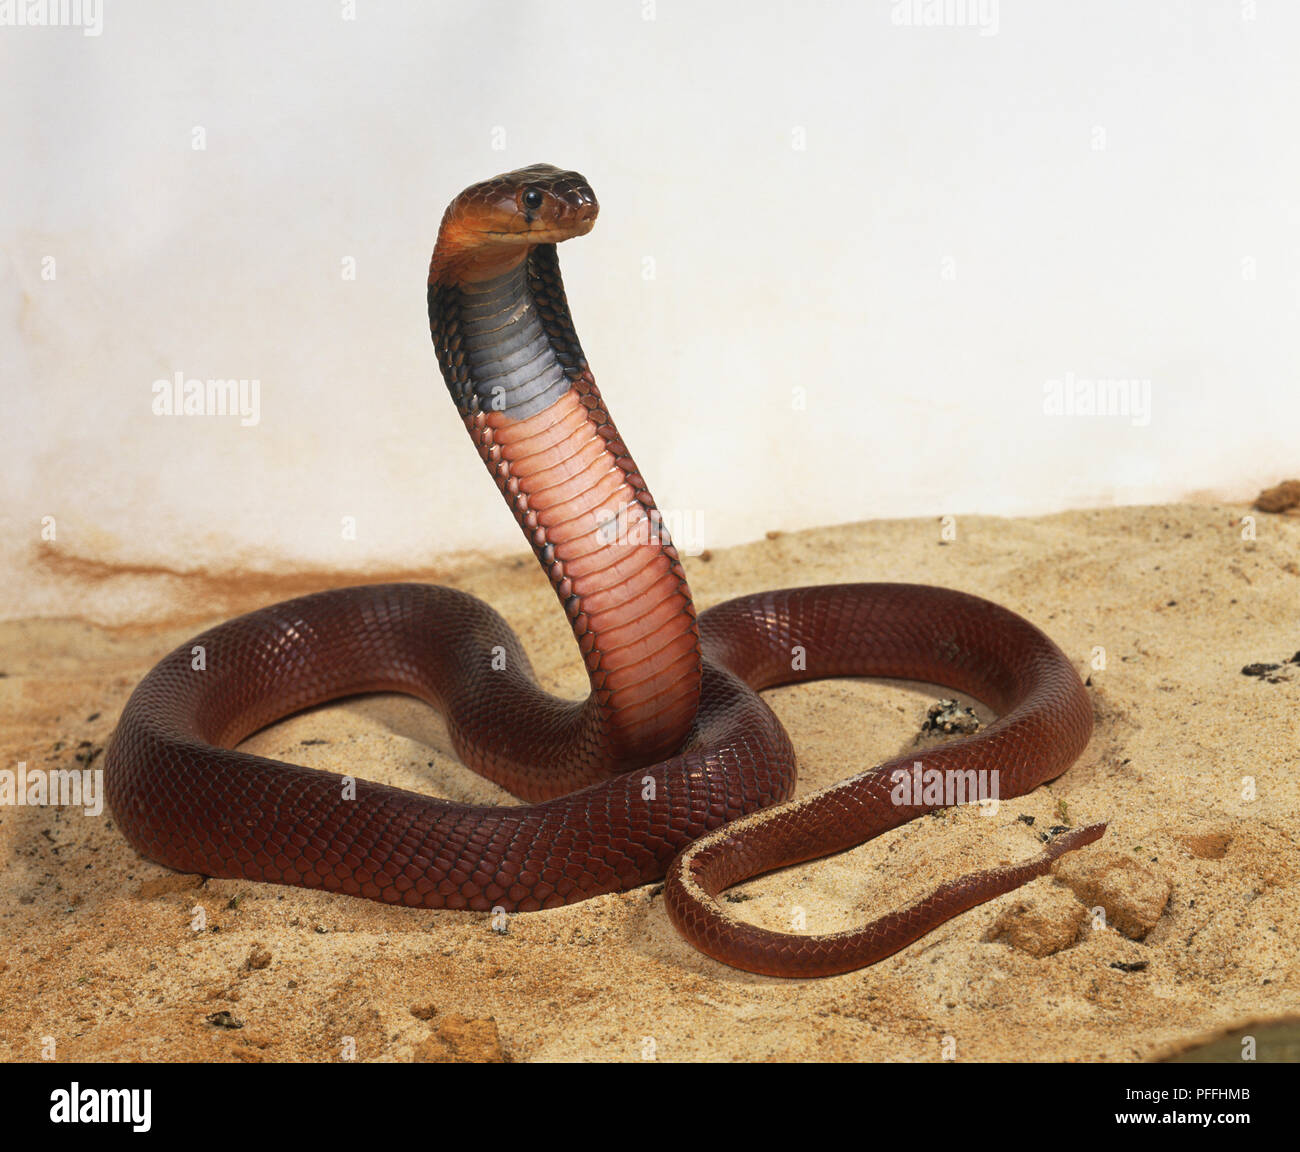 This cobra is salmon-pink to coral-red with a broad black band around the neck. It has a small, round head and large eyes with round pupils; a black teardrop marking is present under each eye. Stock Photo